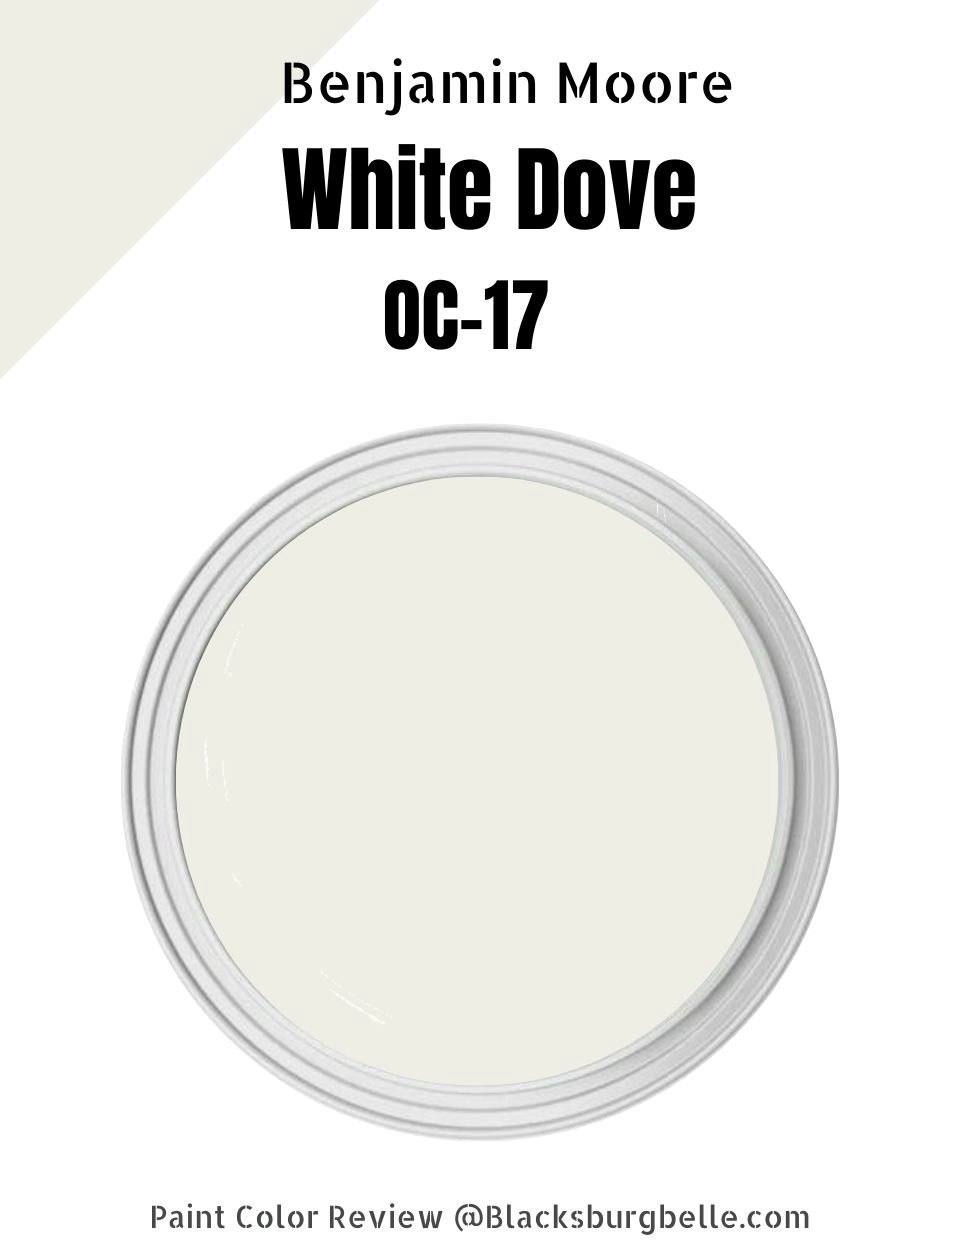 Benjamin Moore White Dove The Right Choice for You